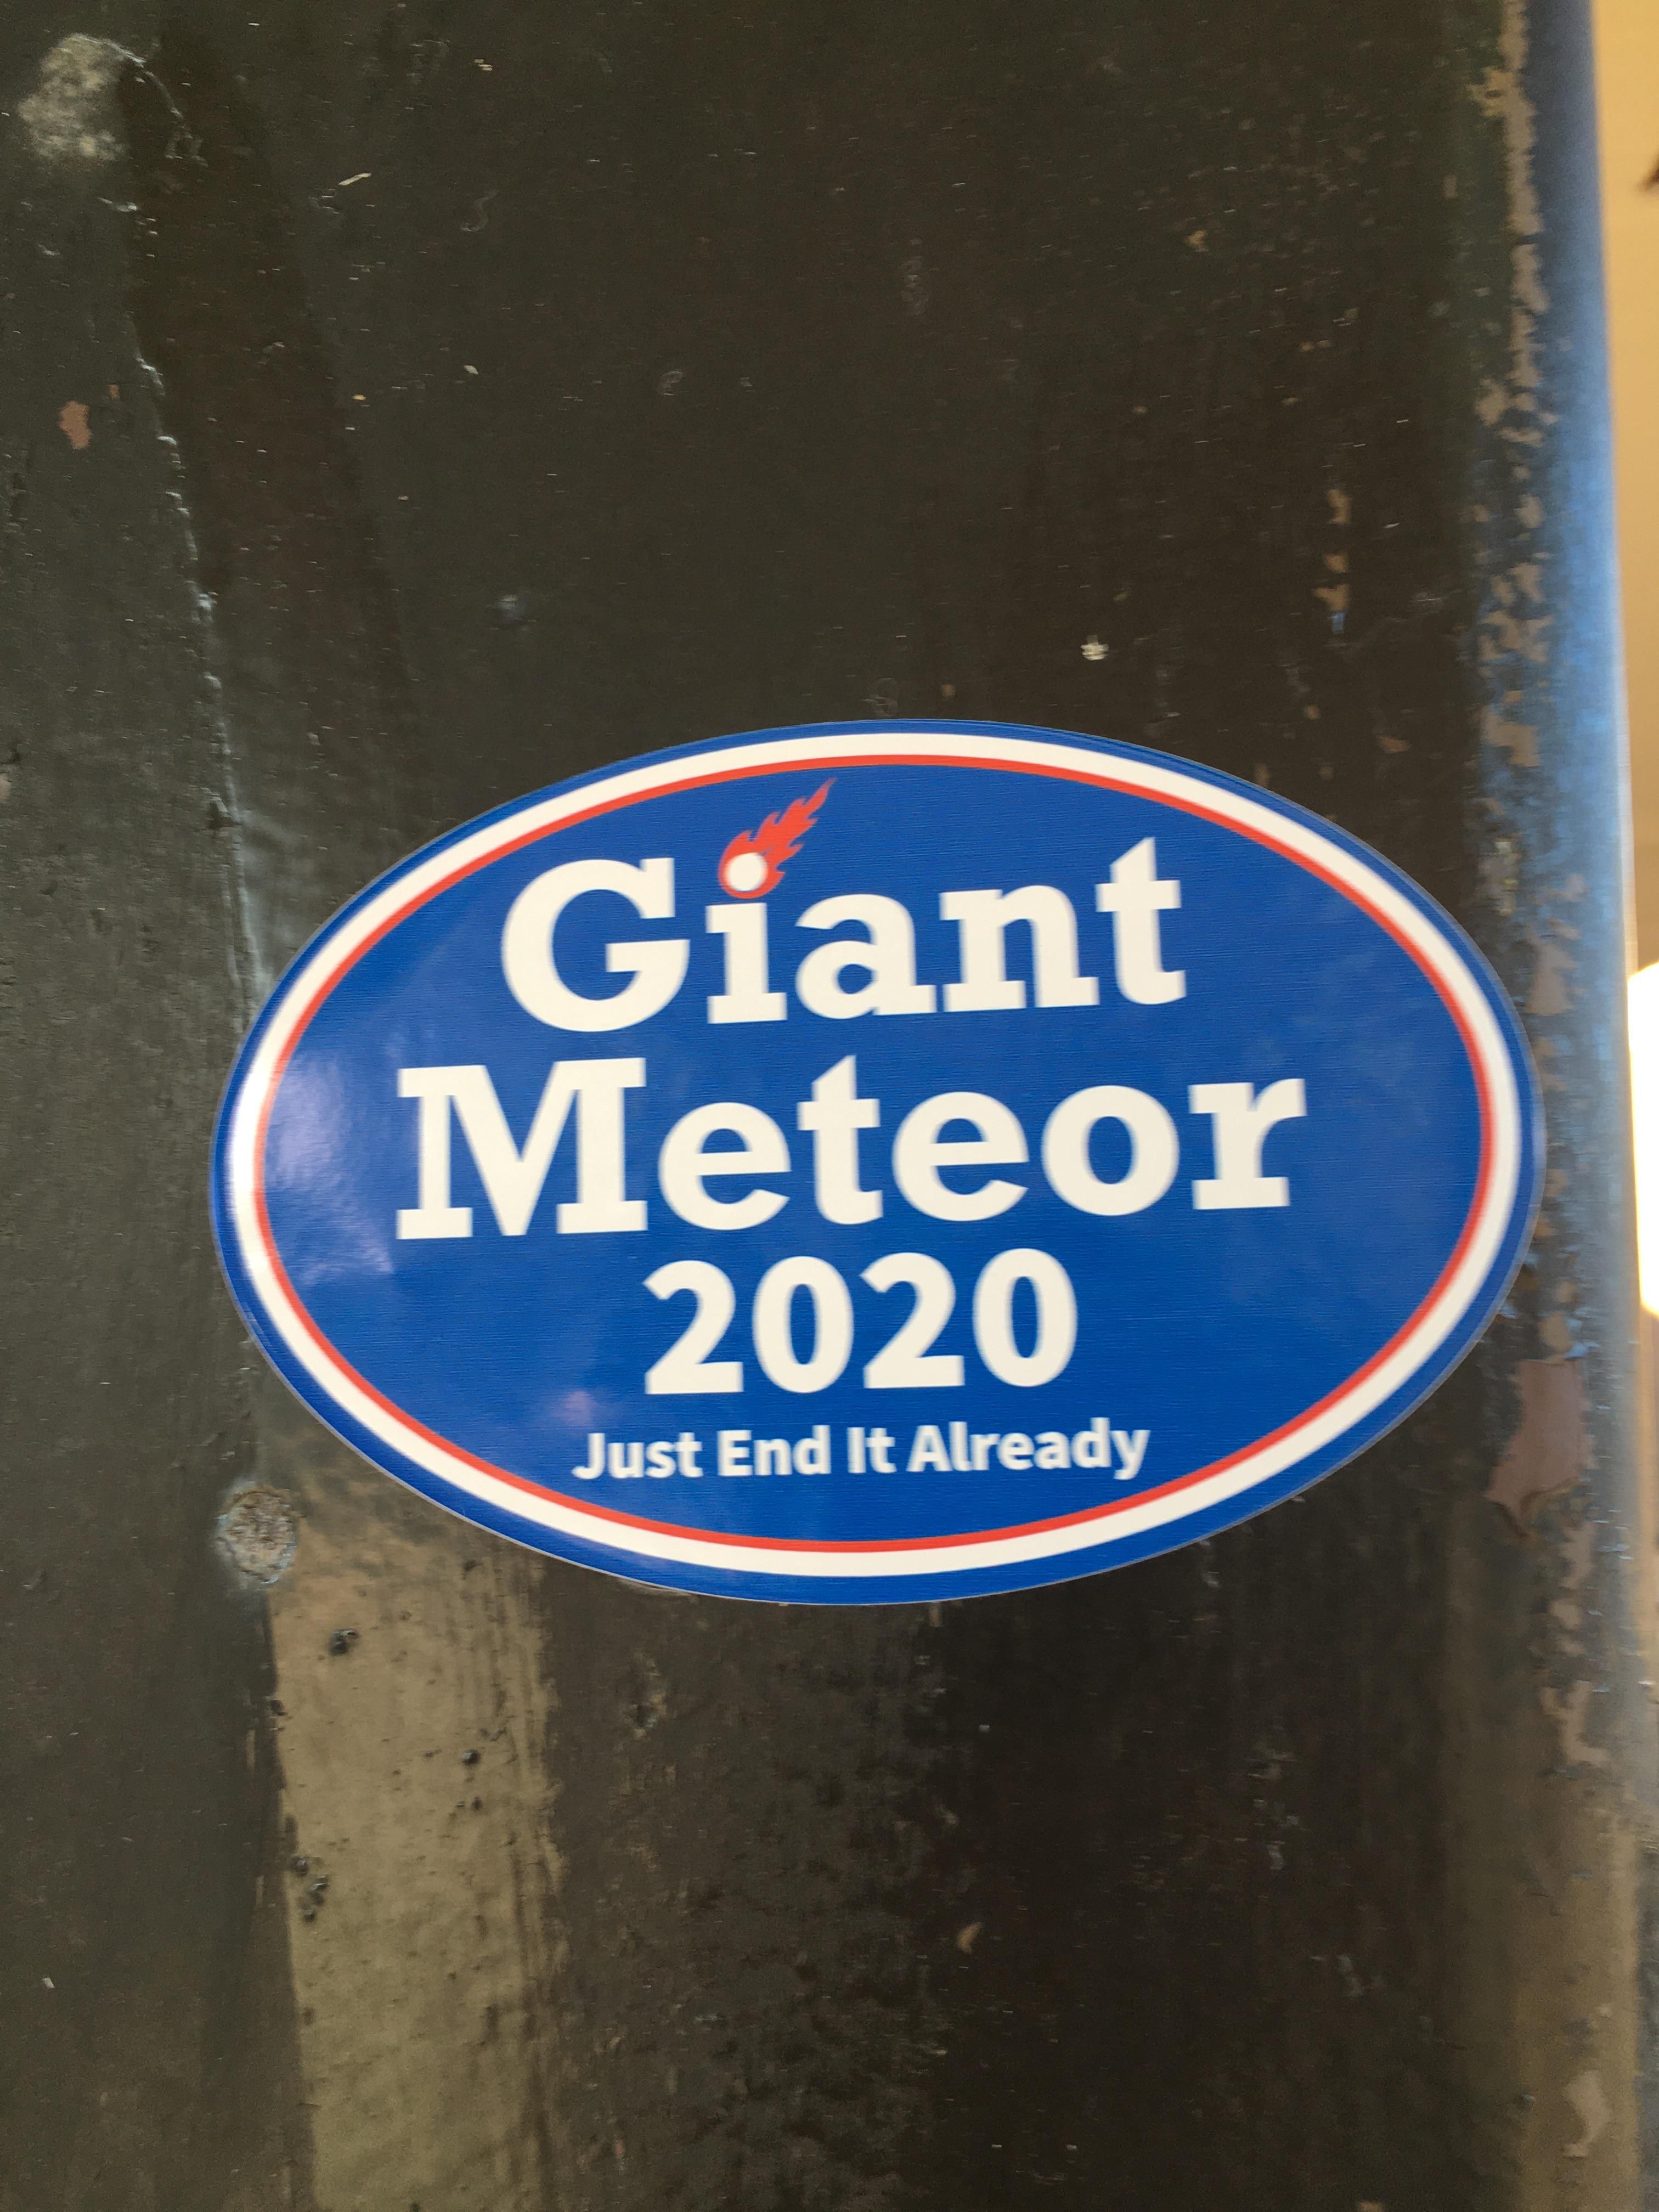 This sticker I found outside of my school earlier this year